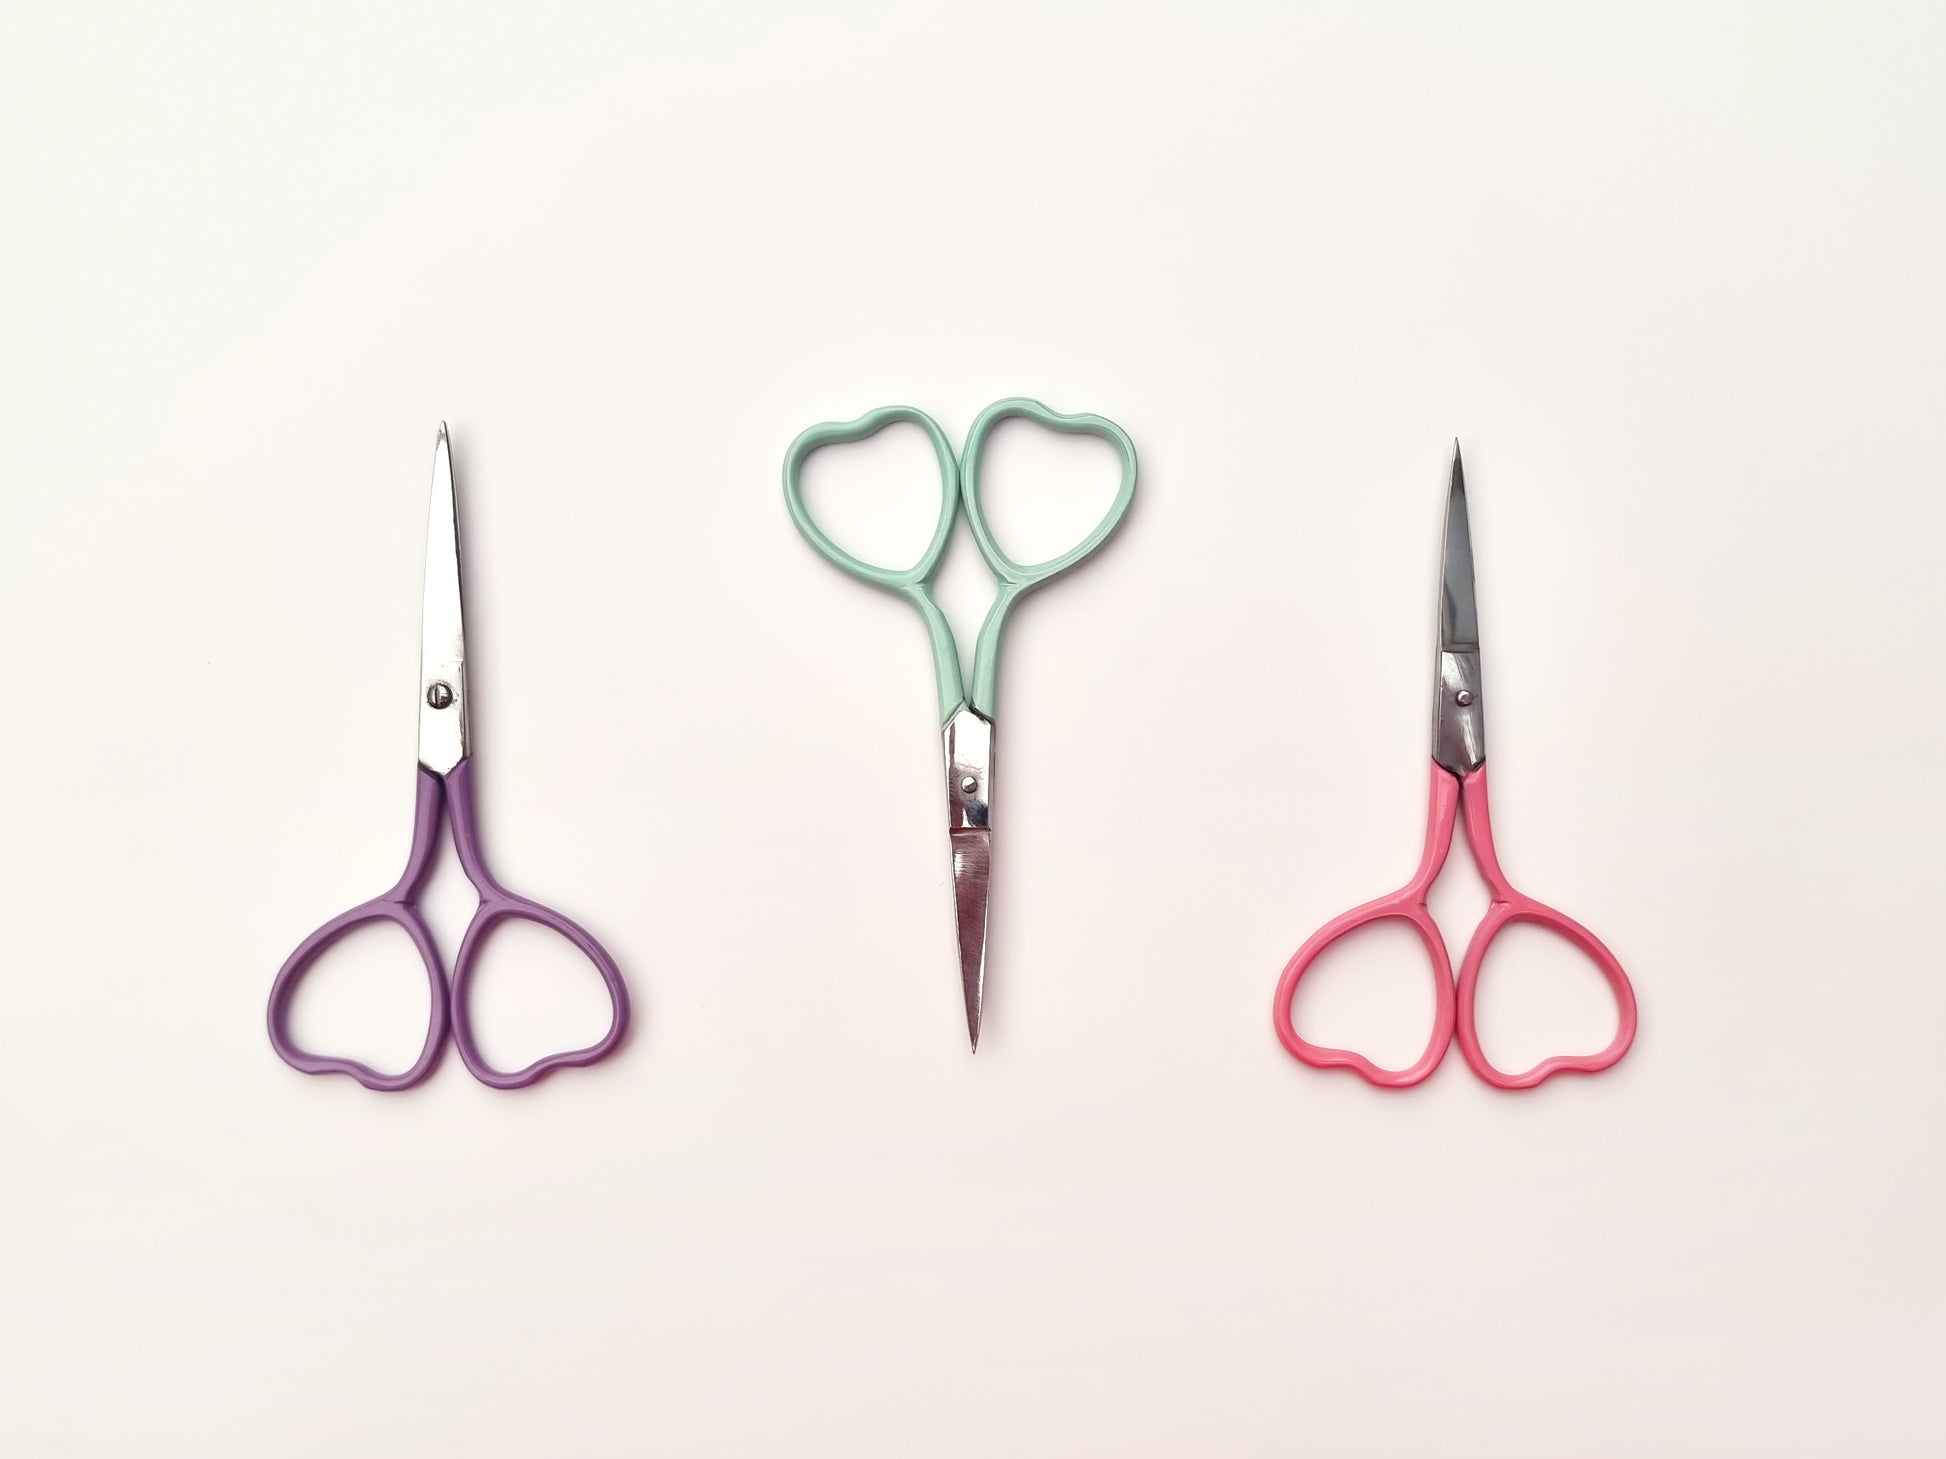 Heart Embroidery Scissors - Embroidery Supplies - ohsewbootiful